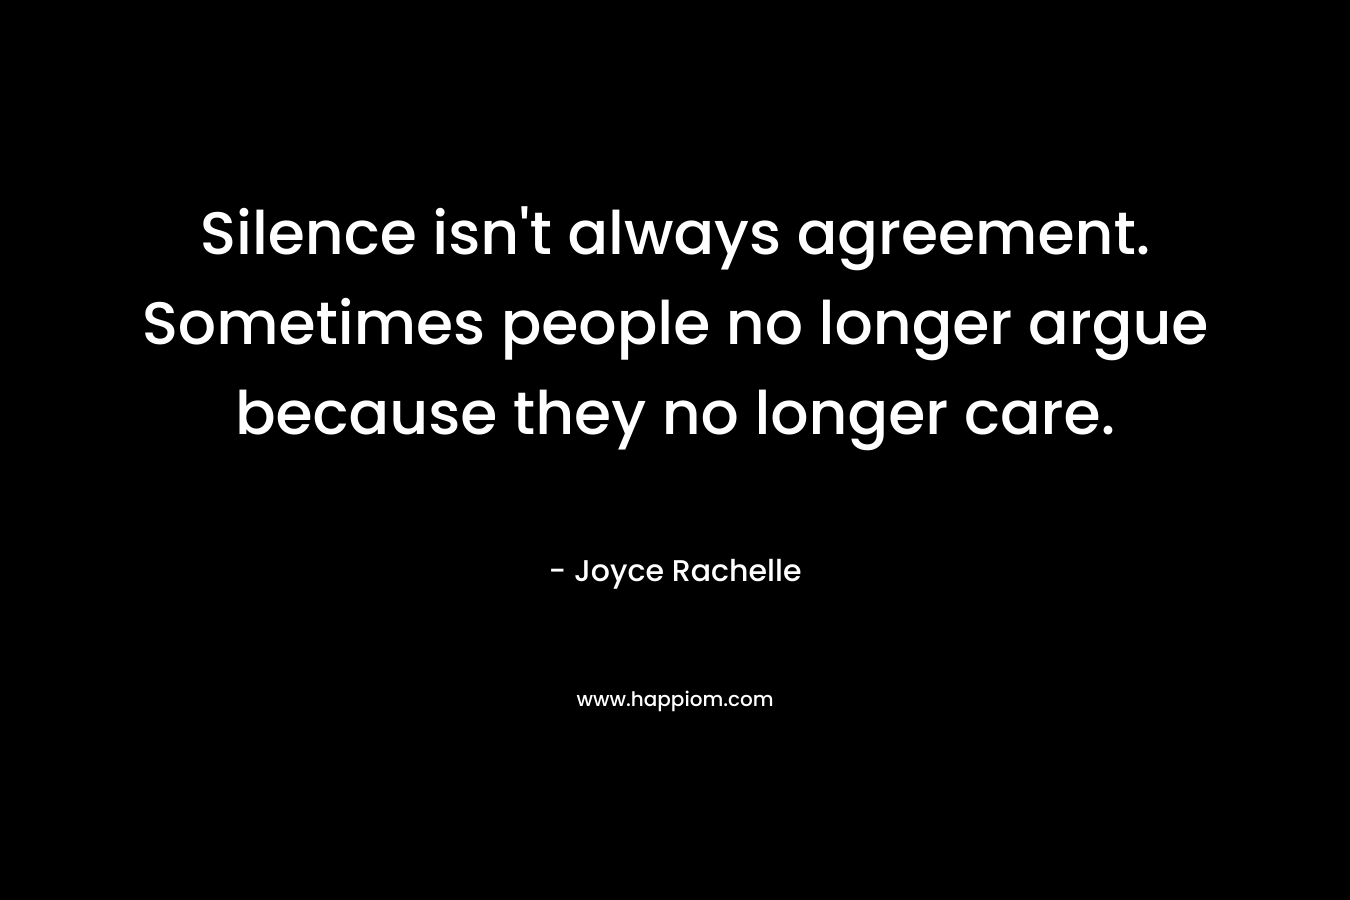 Silence isn't always agreement. Sometimes people no longer argue because they no longer care.